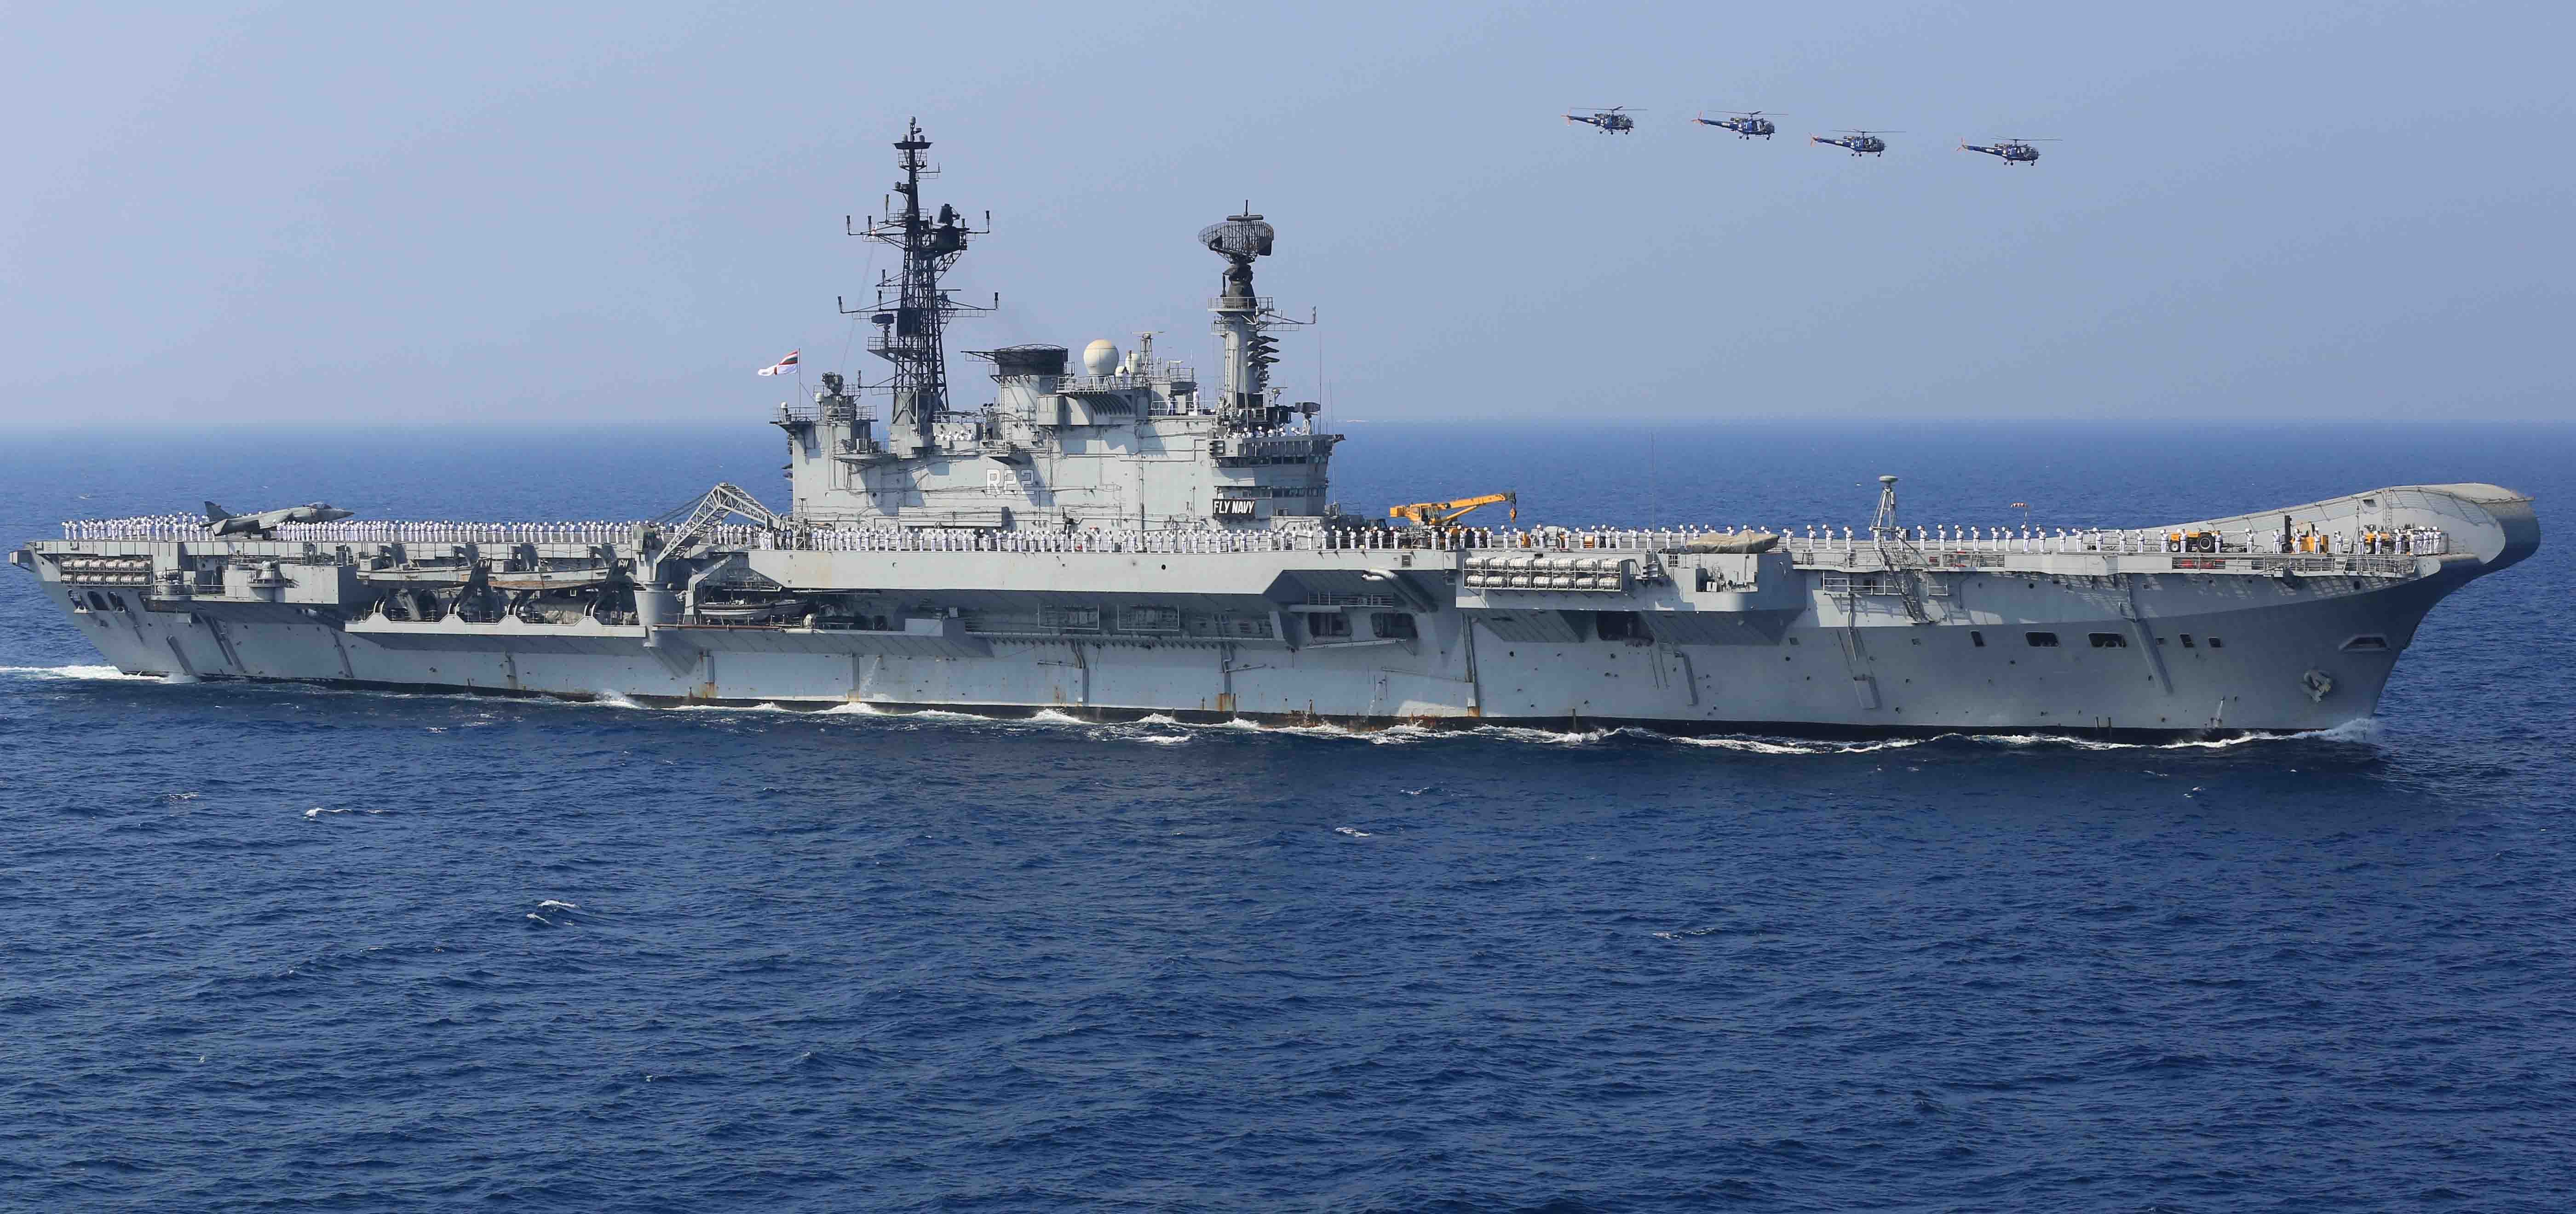 INS Viraat, one of Indian Navy's two Carrier Task Forces, deployed